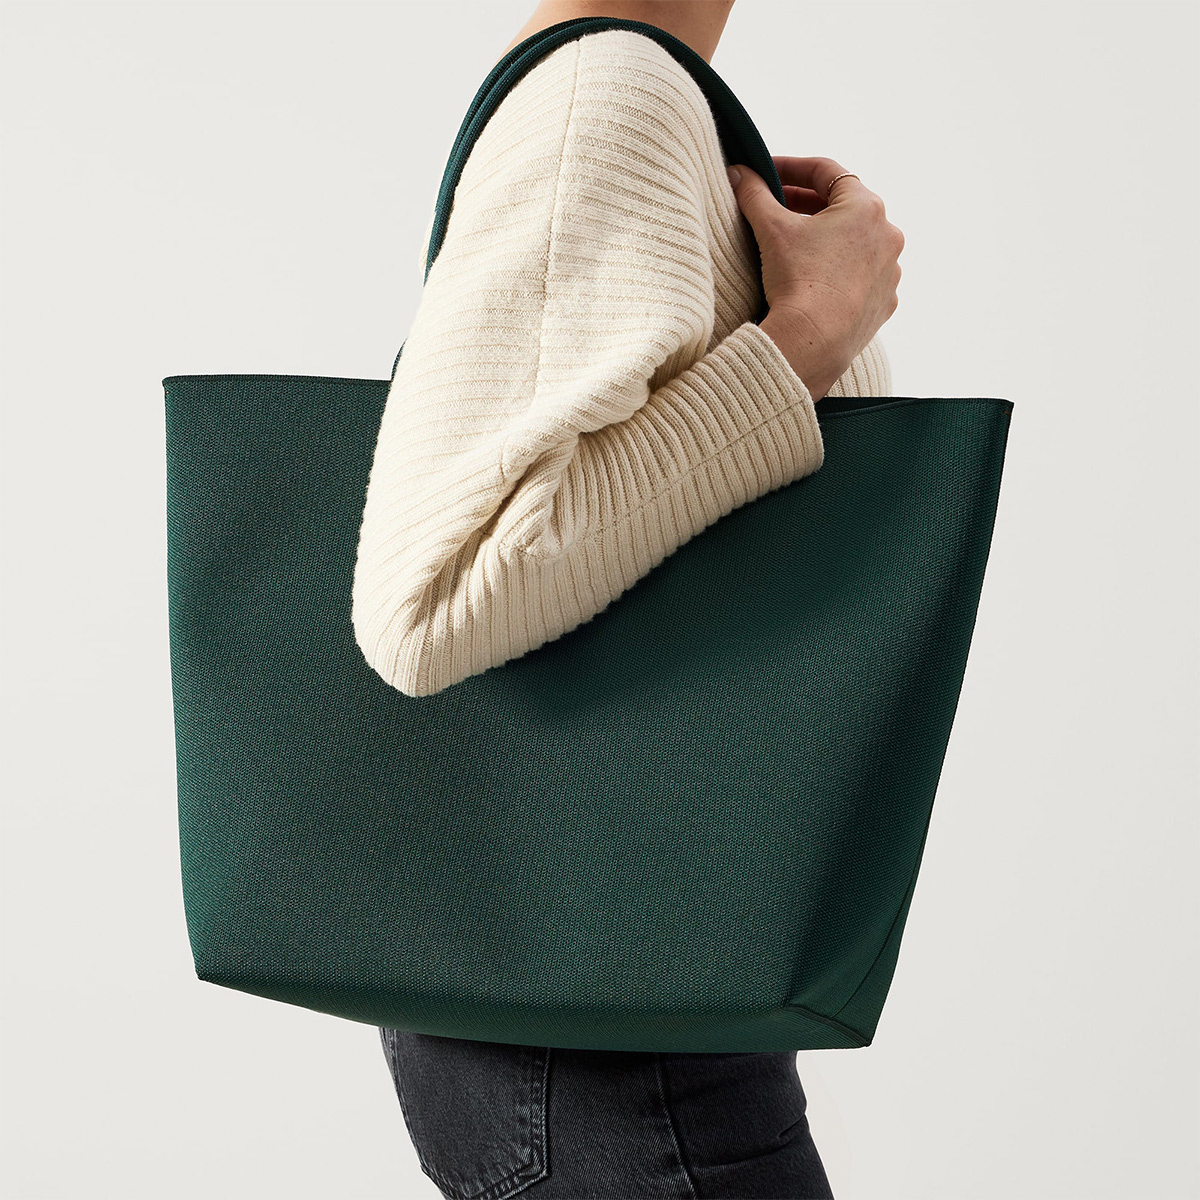 E! Insider’s 20 Days of Giftmas Giveaways: Enter to Win Rothy’s The Lightweight Tote – E! Online